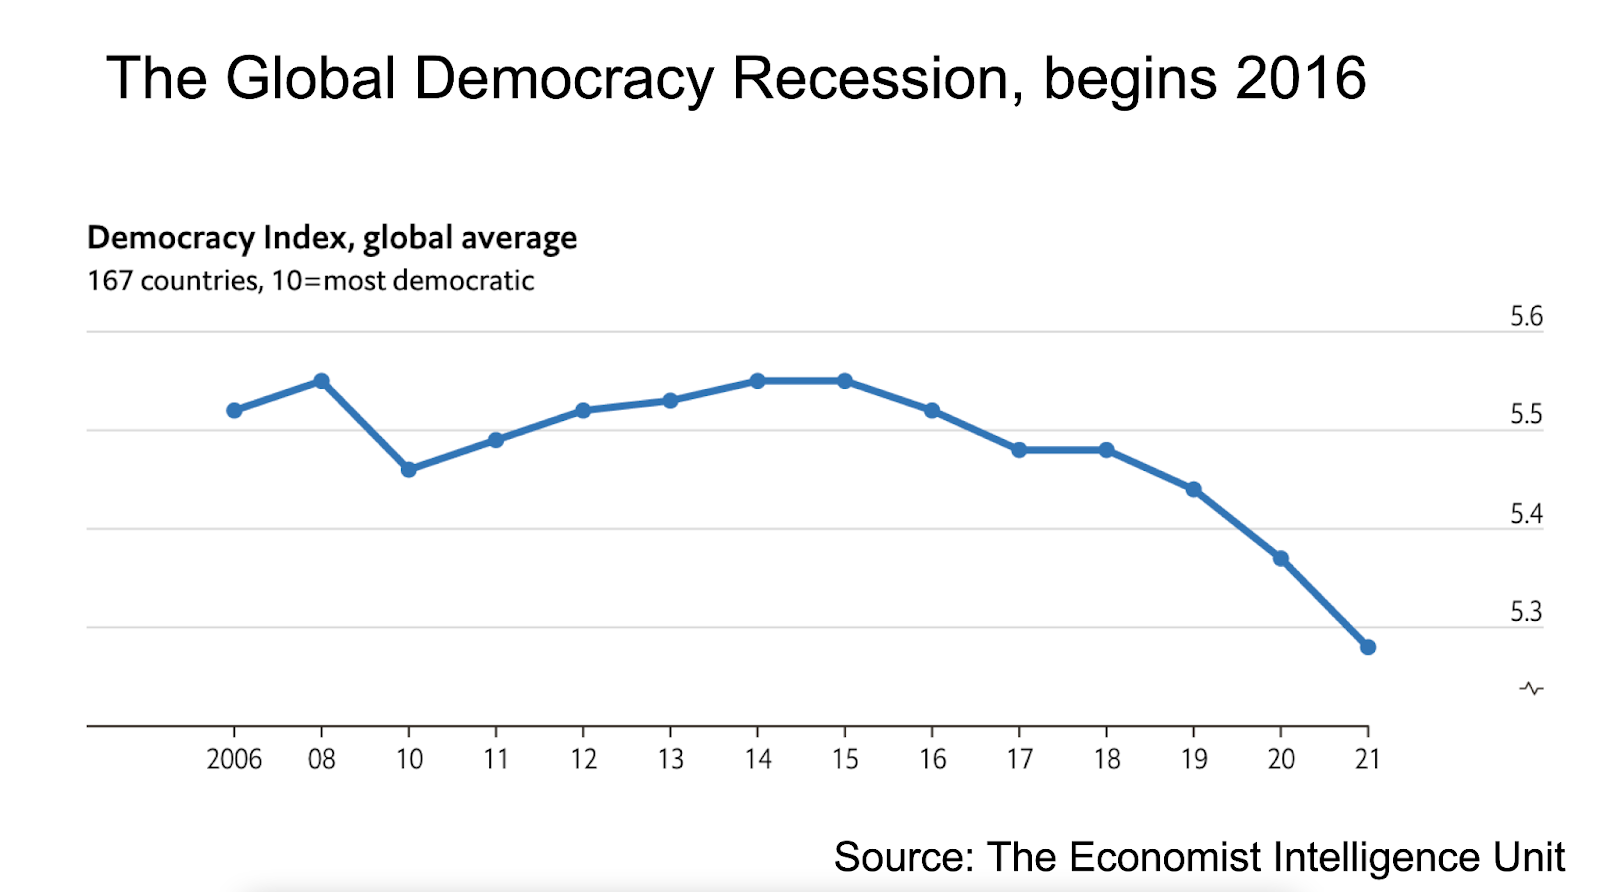 The Global Democracy Recession, begins 2016. Uses the global democracy index. On a scale of 1 to 10, 167 countries were rated on how democratic they are. Scores have been declining since 2014.